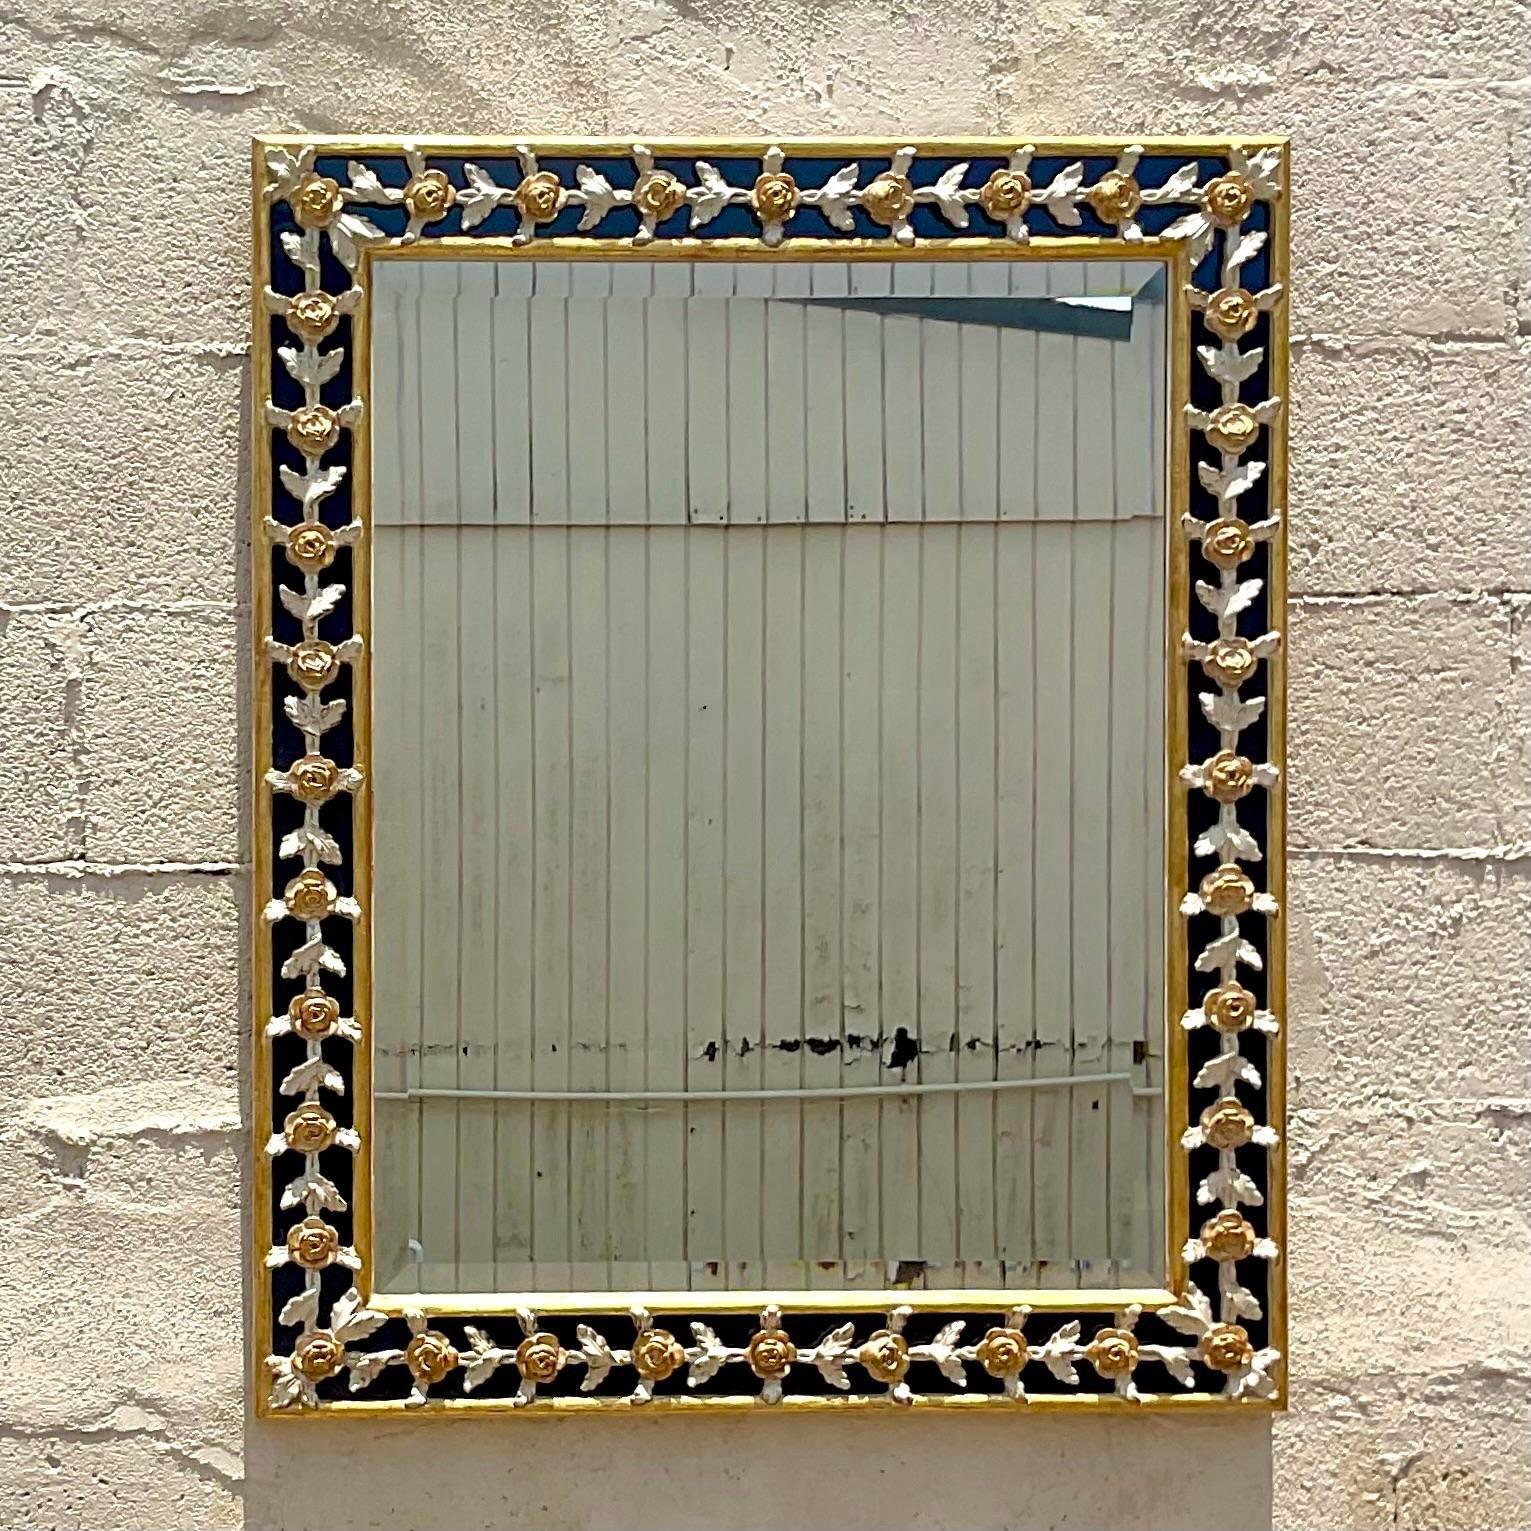 A fantastic vintage Regency wall mirror. Made by the coveted Giovanni Chellini group. Beautiful harp d carved detail with gilt tipping. Acquired from a Palm Beach estate. 